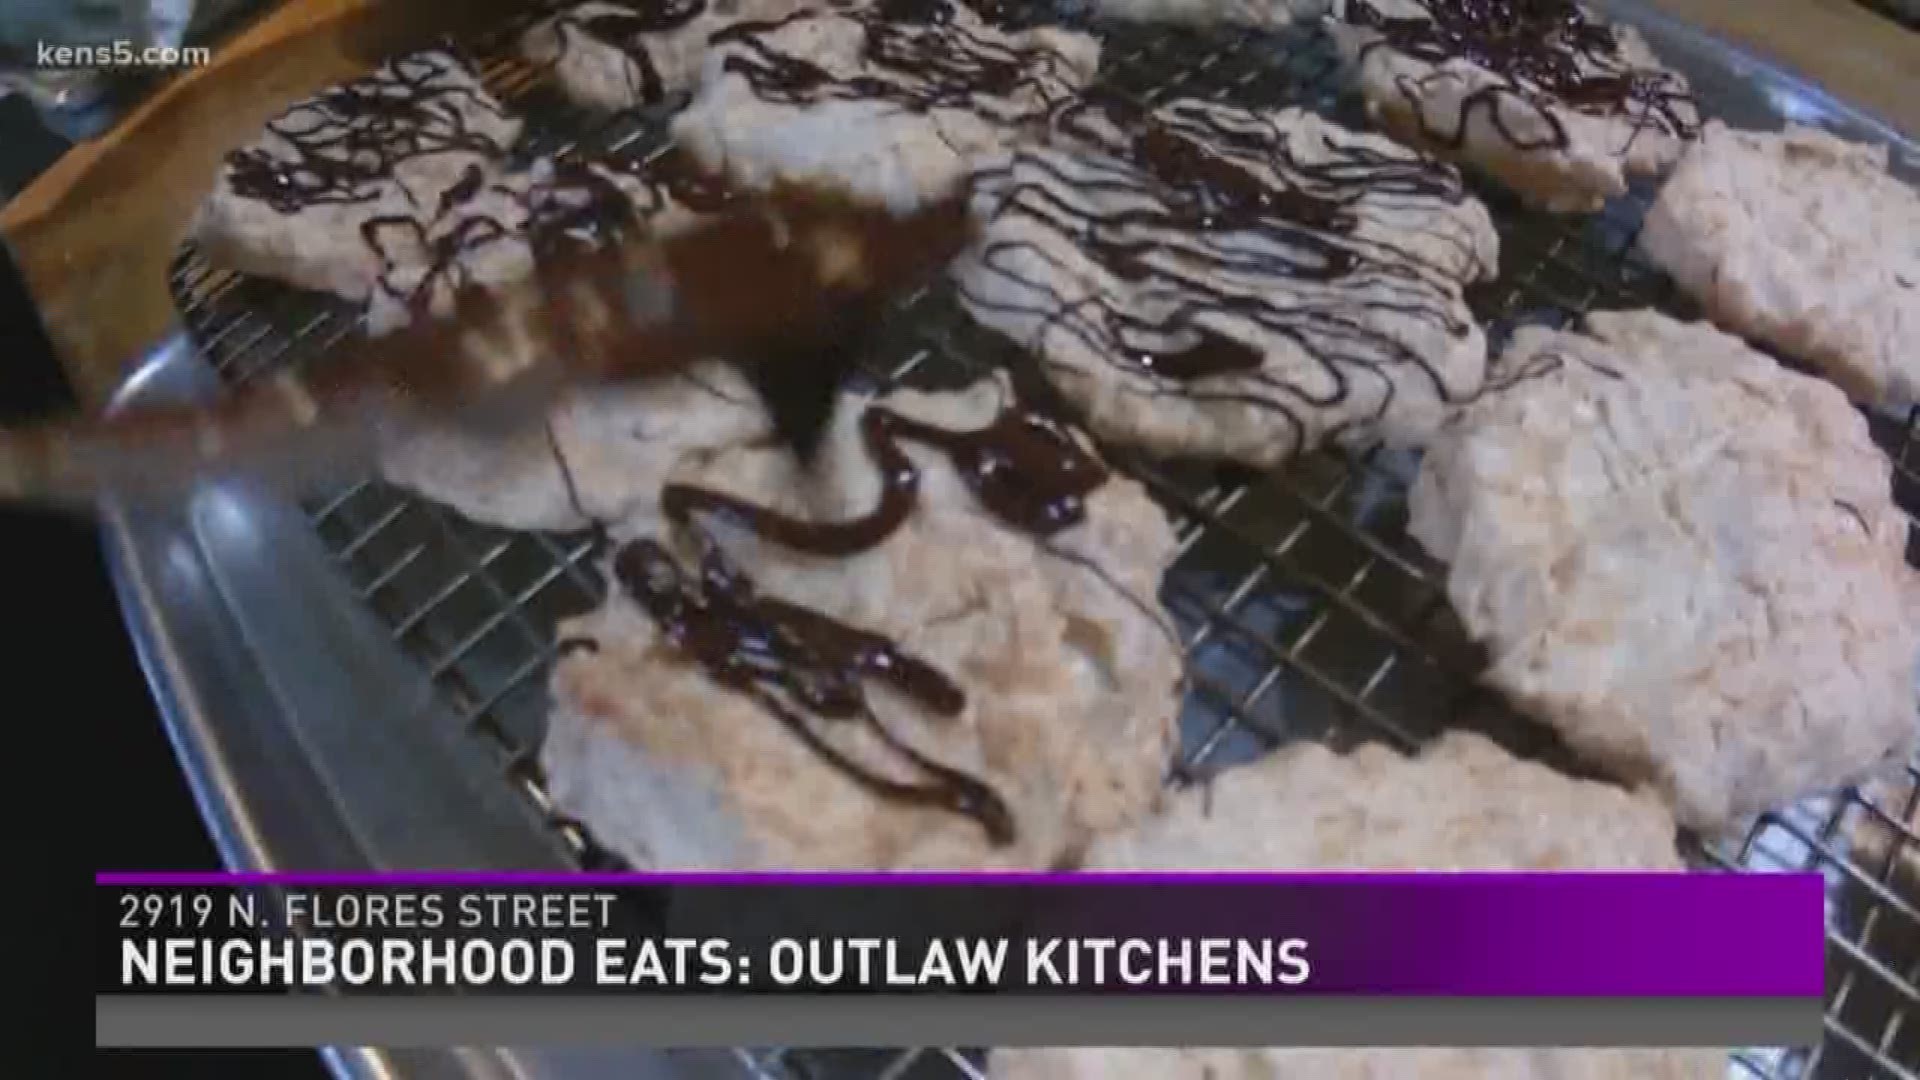 KENS 5's Marvin Hurst introduces us to Outlaw Kitchens, a gourmet restaurant tucked away in a neighborhood near downtown.